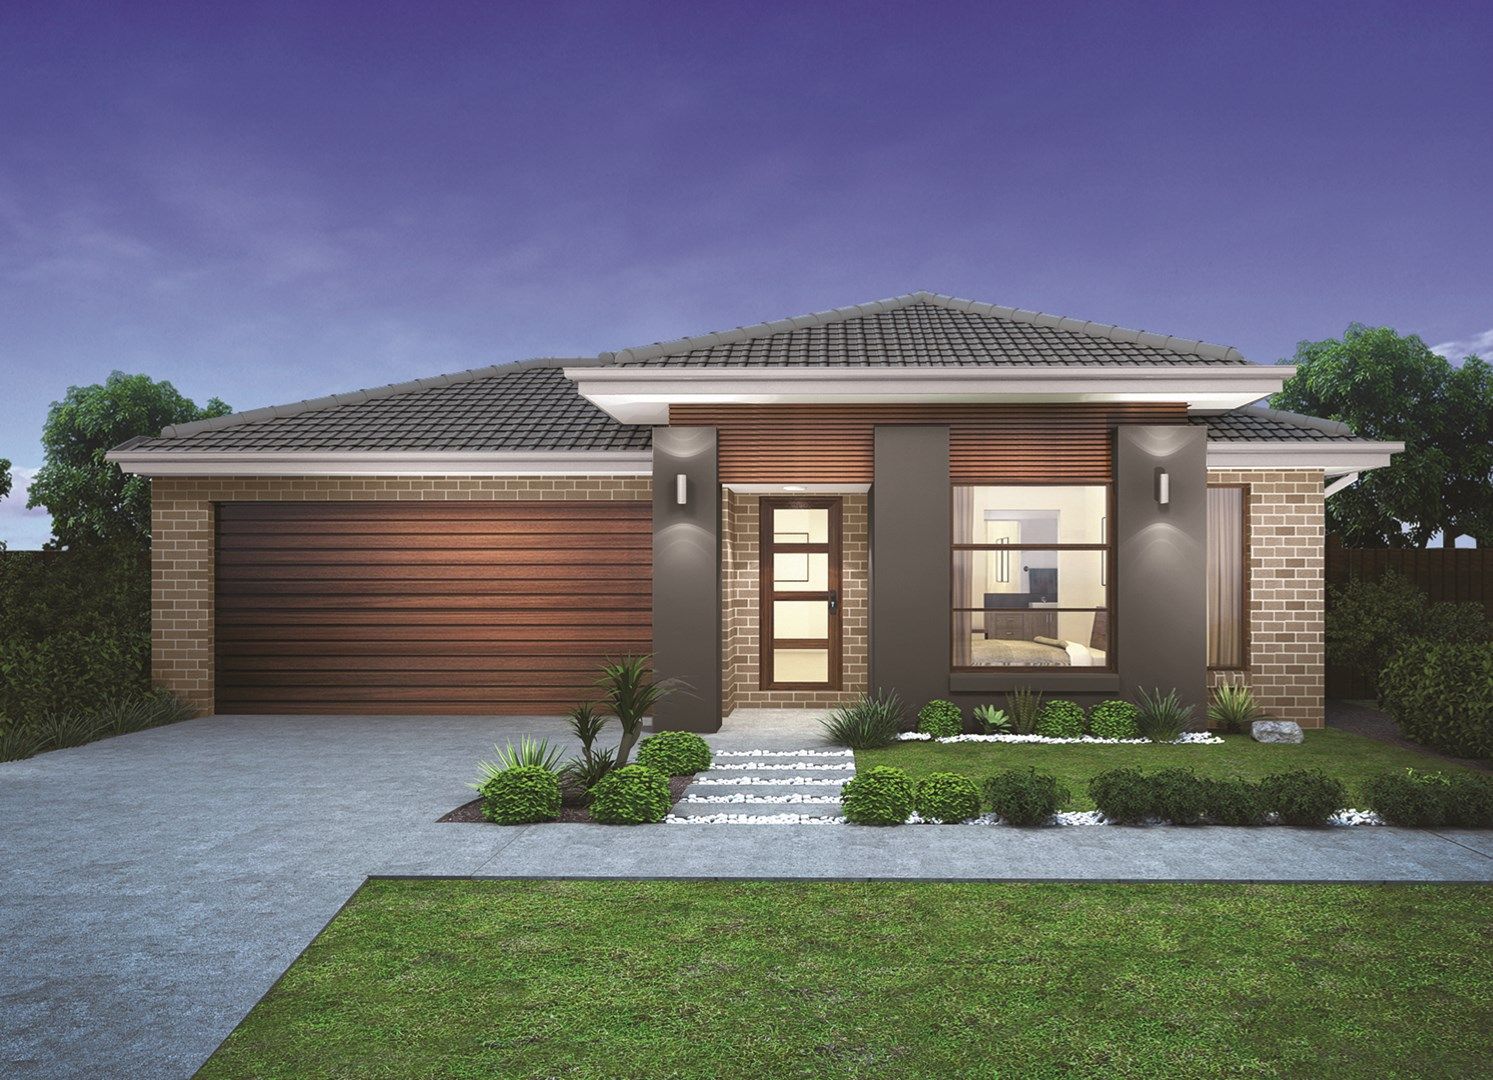 4 bedrooms New House & Land in Lot 729 Taylors Run Estate FRASER RISE VIC, 3336